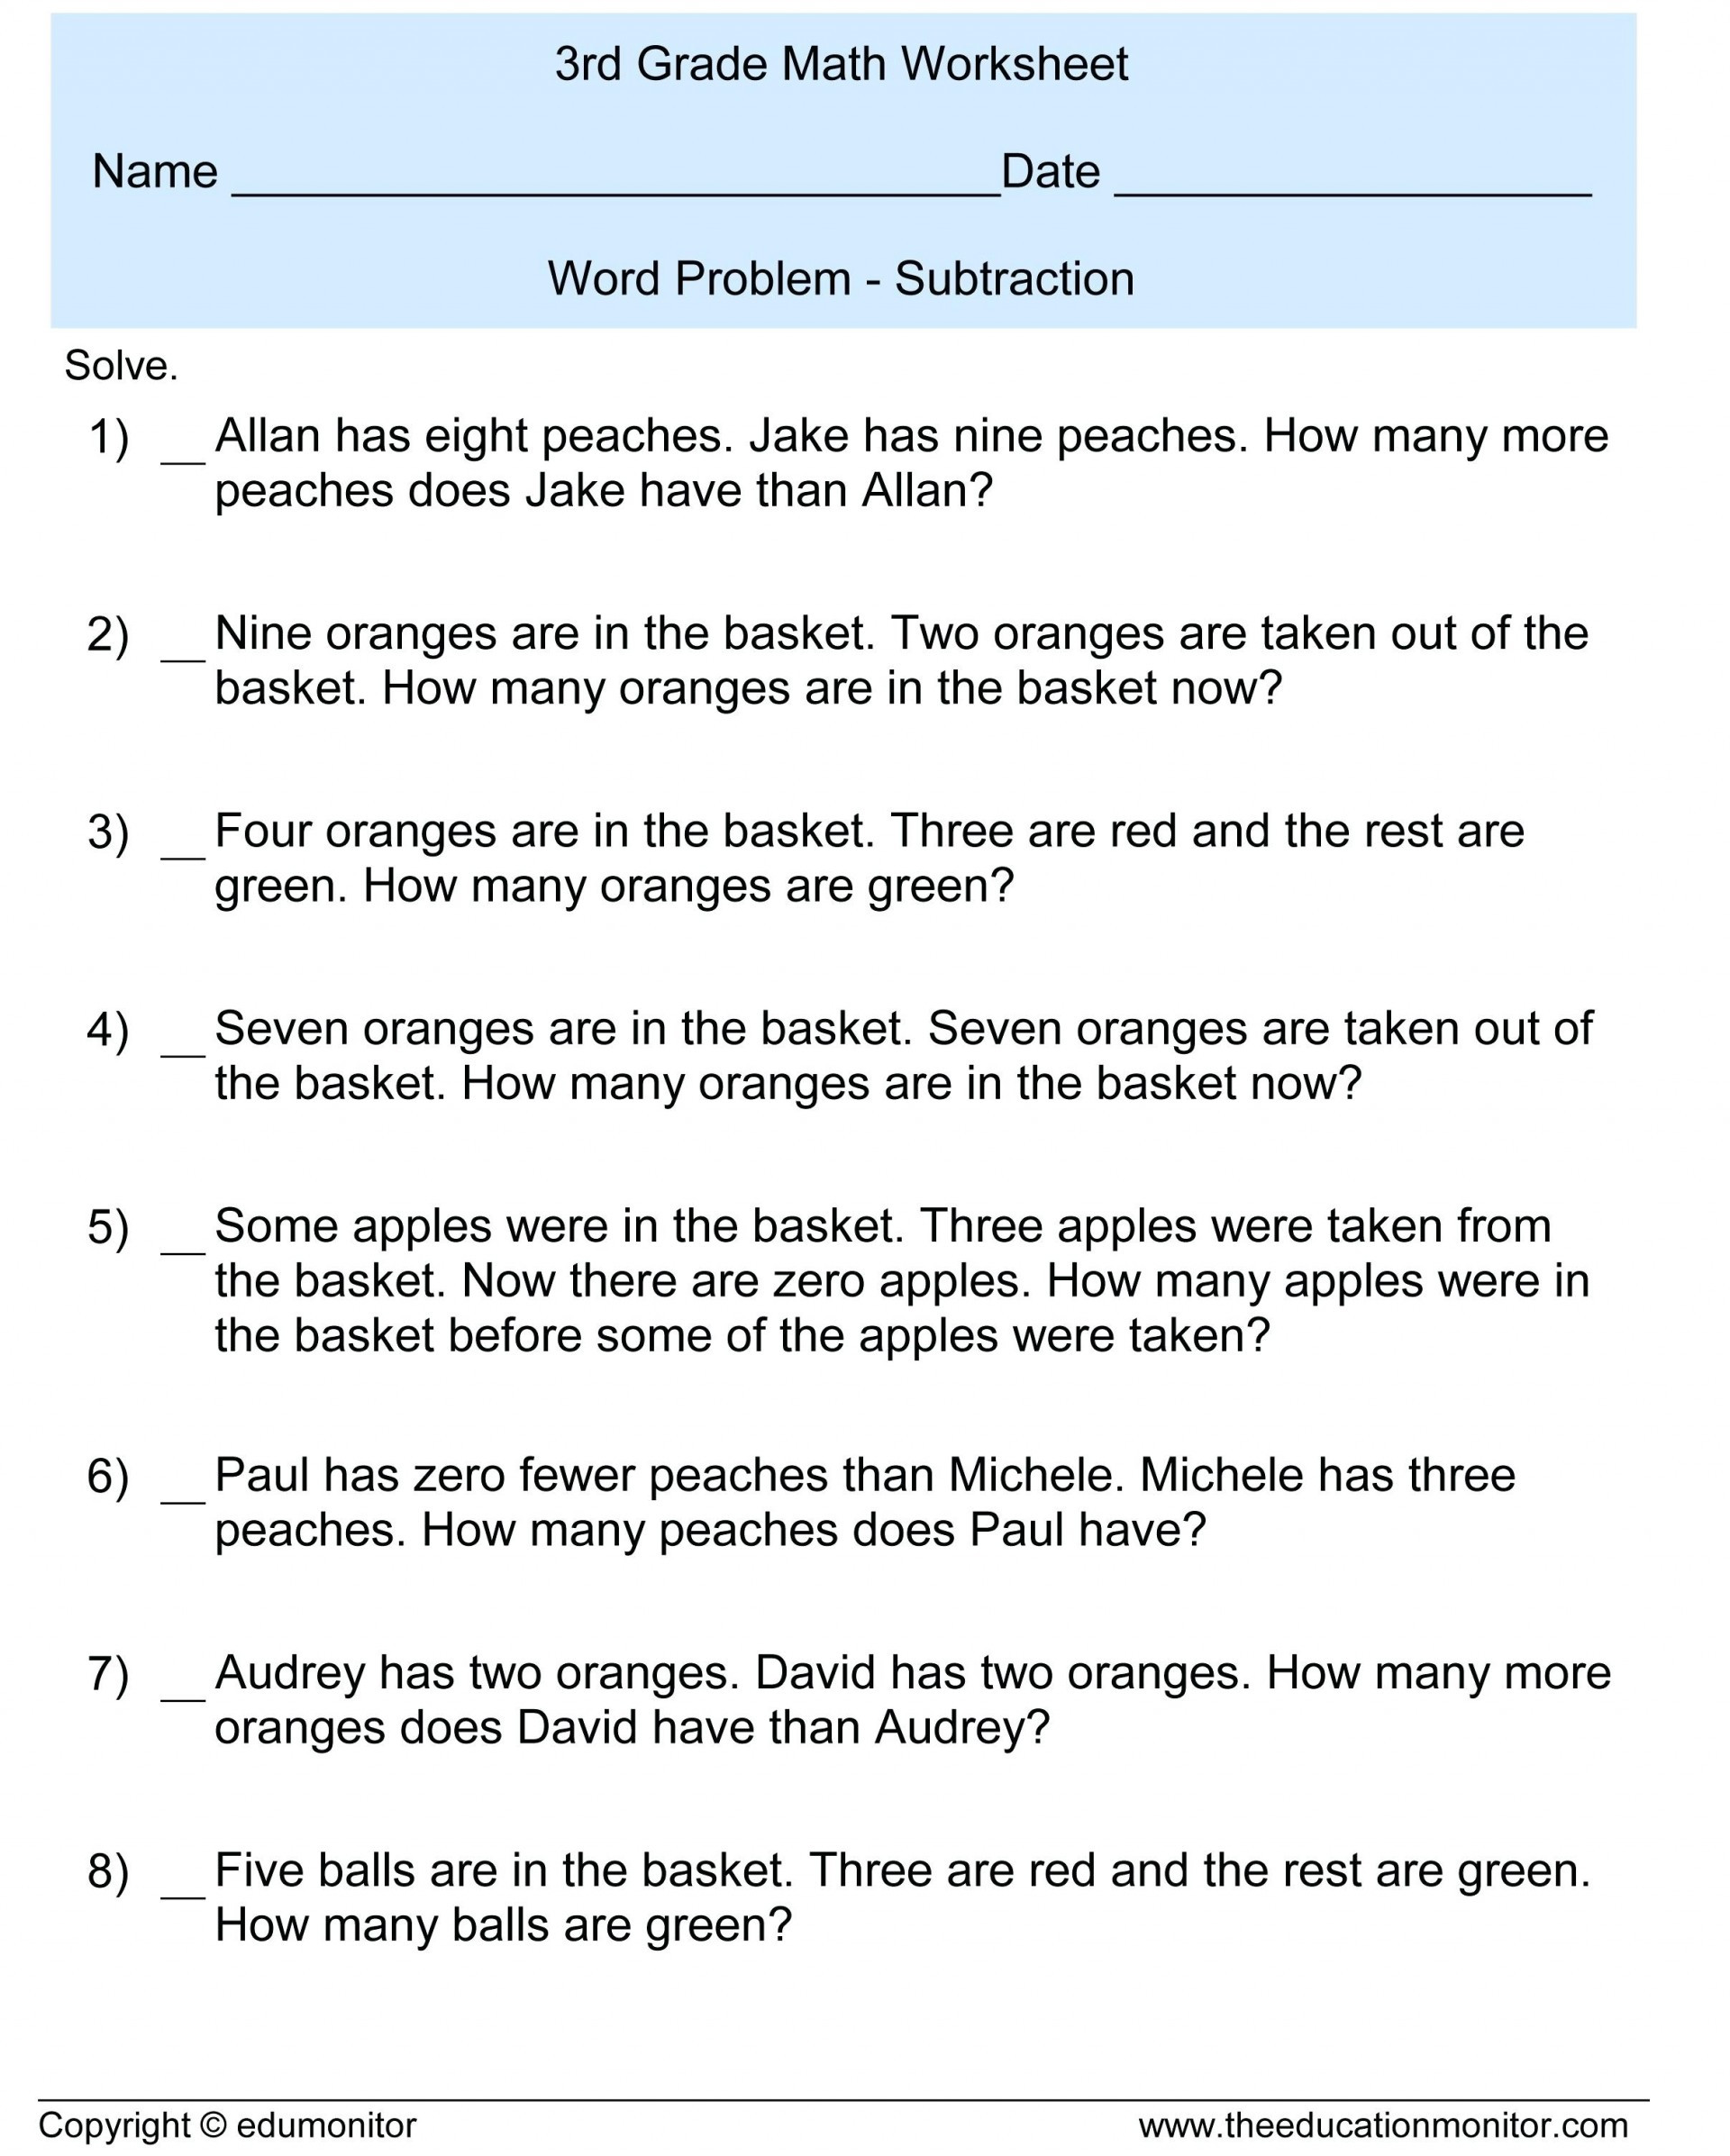 030 worksheet full size of single digit subtraction word problems for third graders addition and worksheets grade 1920x2394